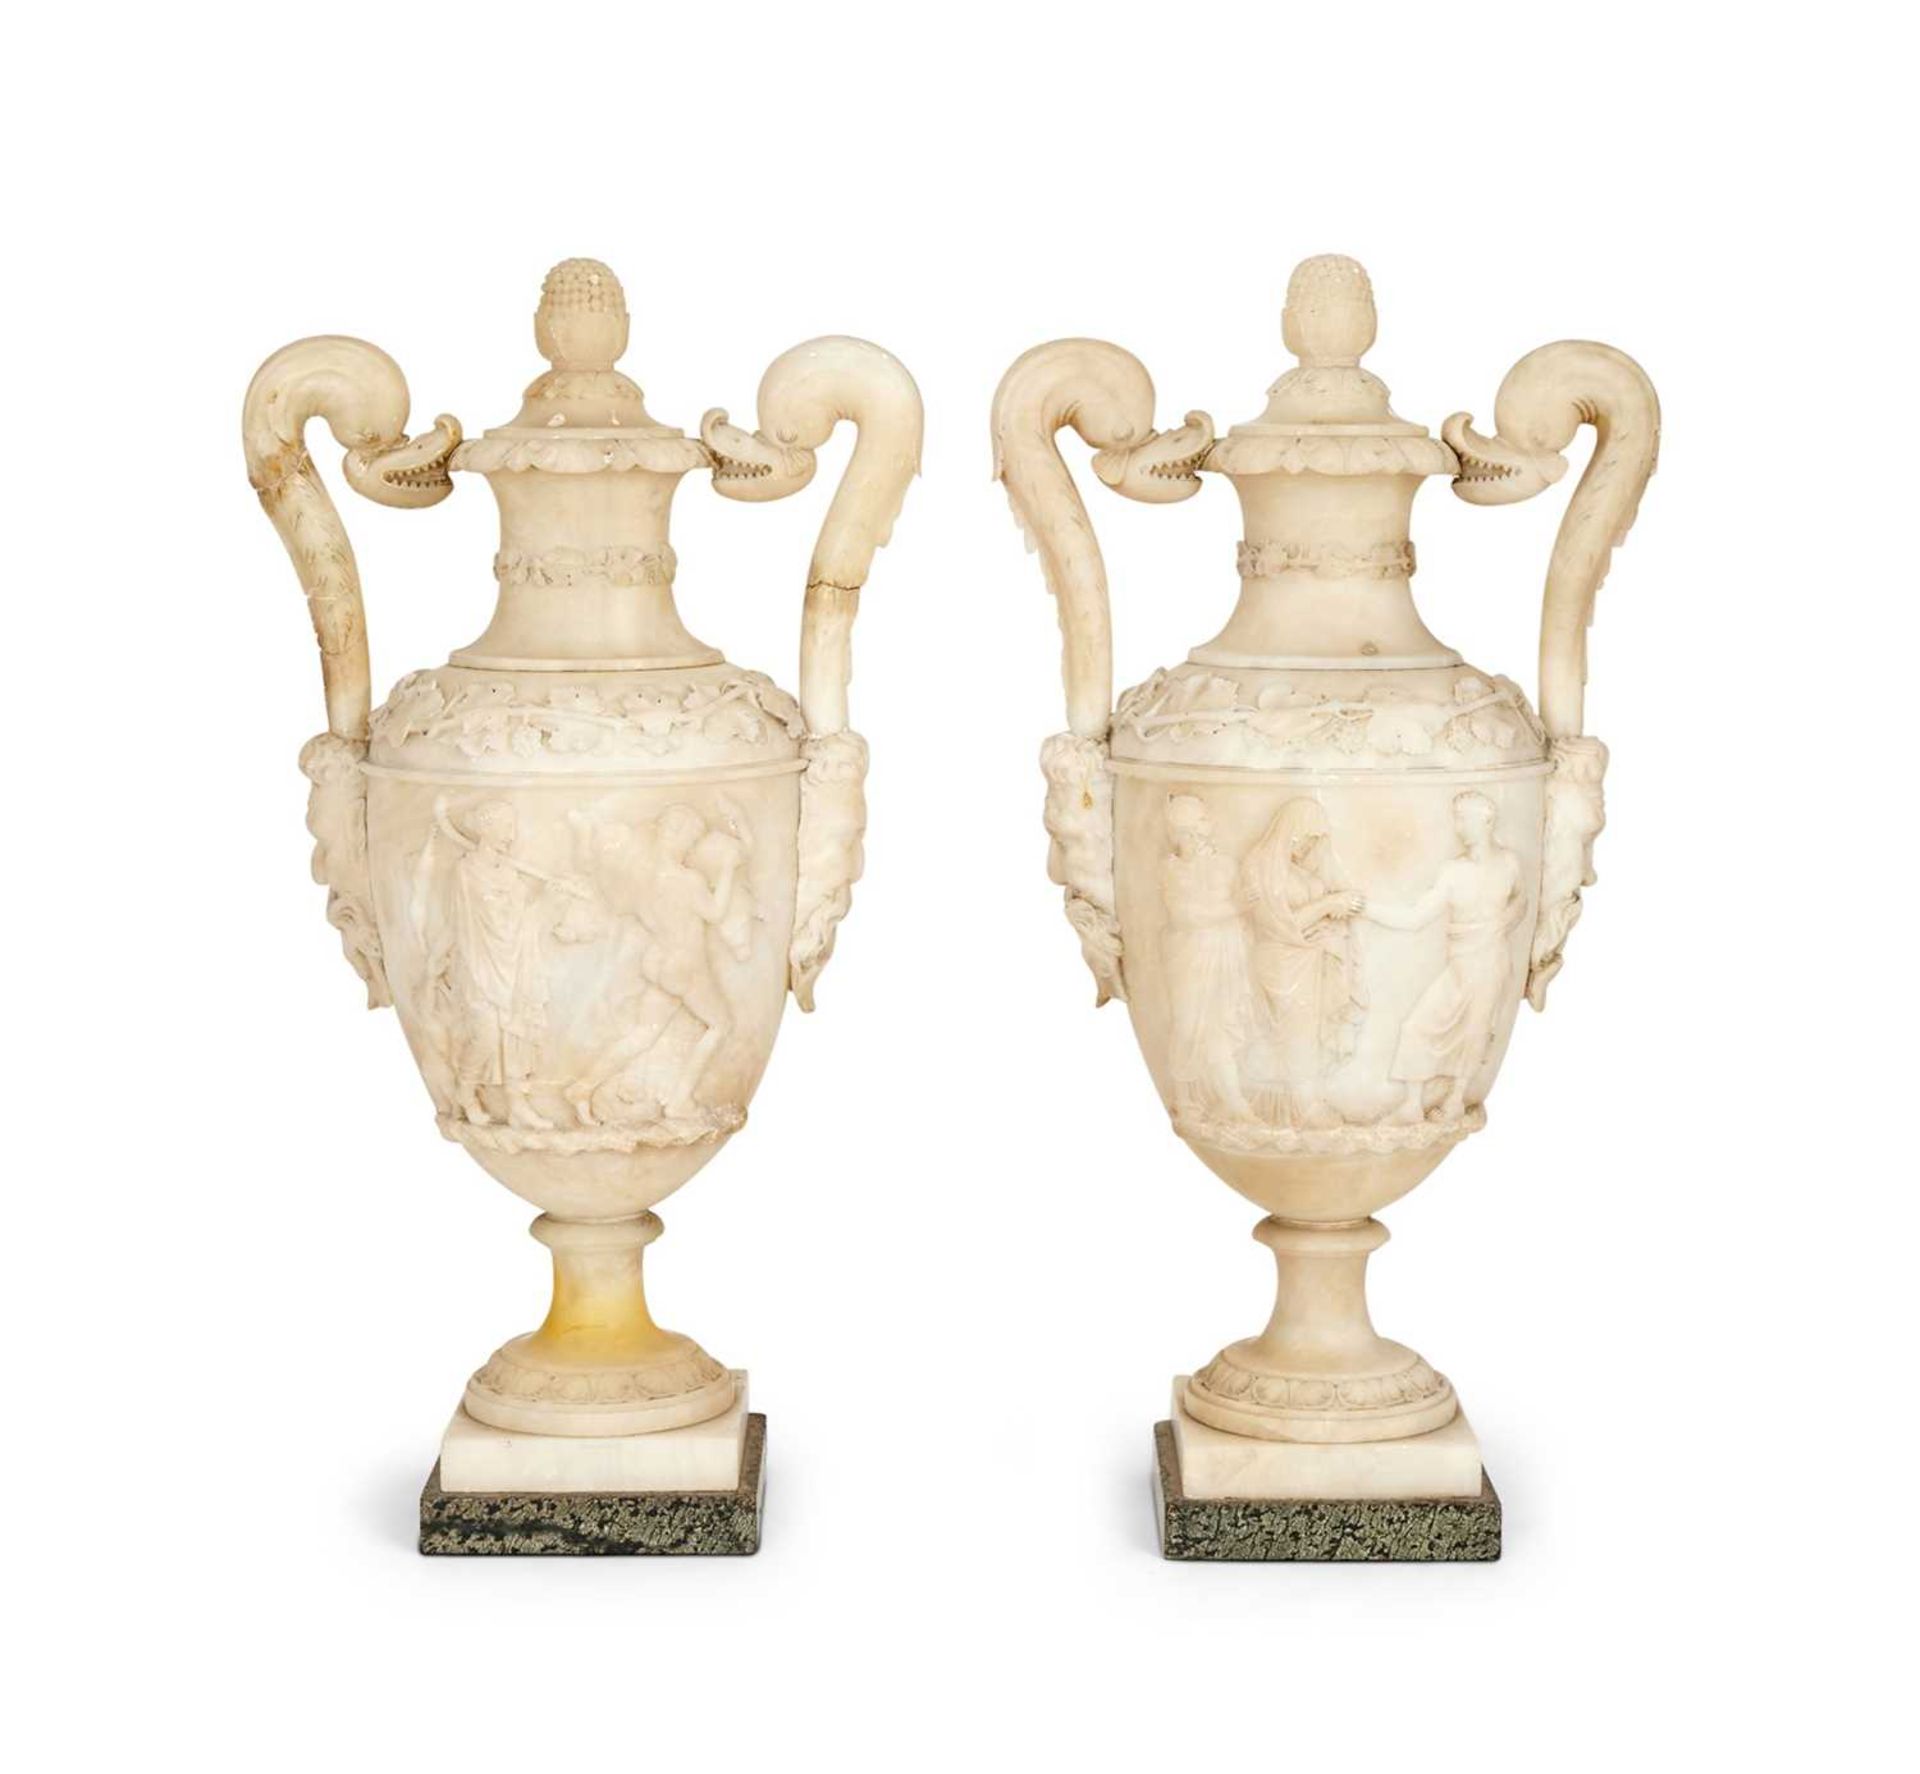 A LARGE PAIR OF 19TH CENTURY ITALIAN ALABASTER URNS AND COVERS IN THE STYLE OF PIRANESI - Image 9 of 12